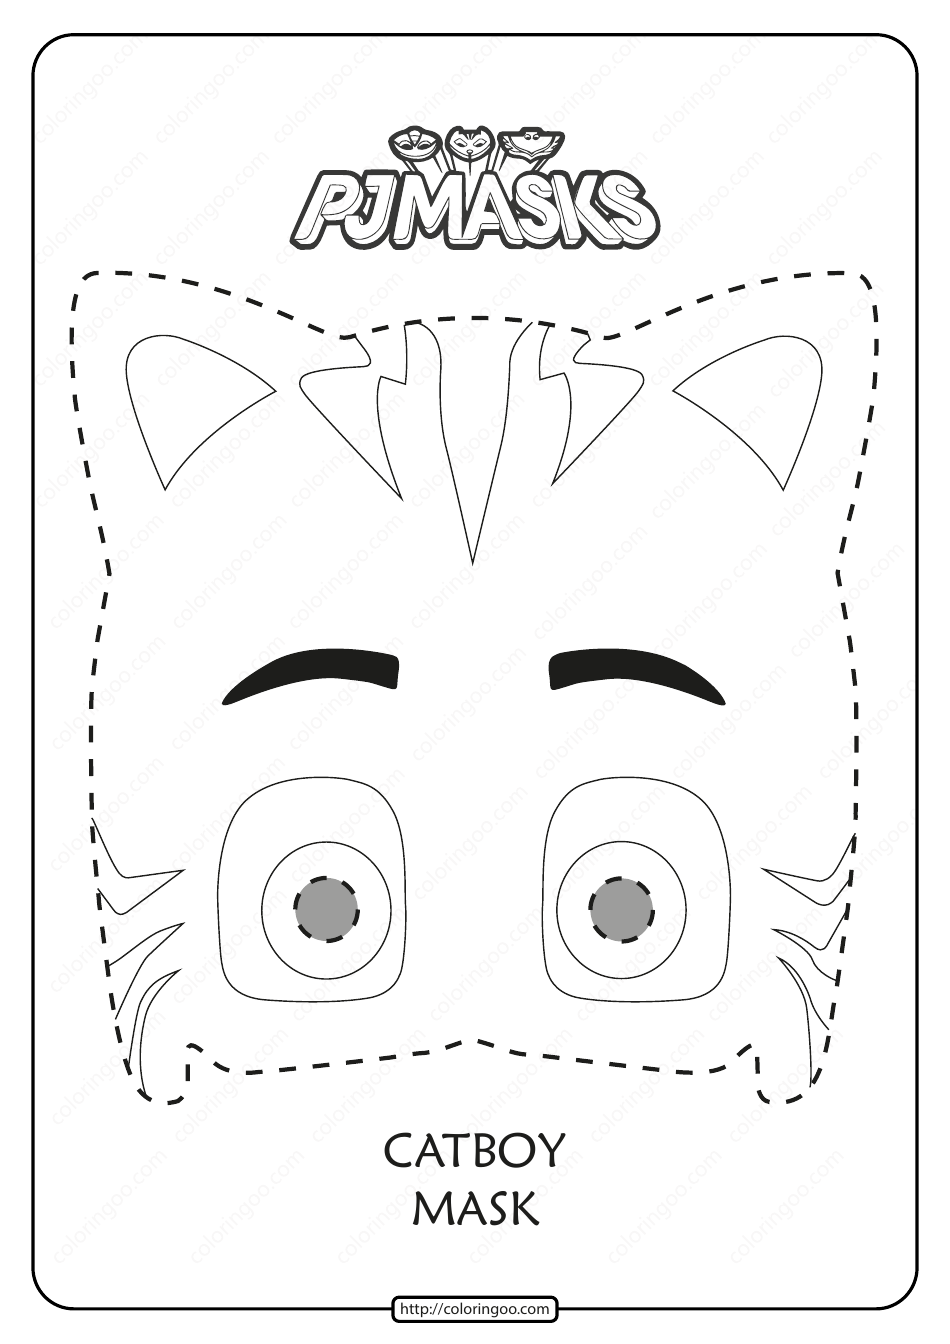 Catboy Mask Coloring Template, Page 1